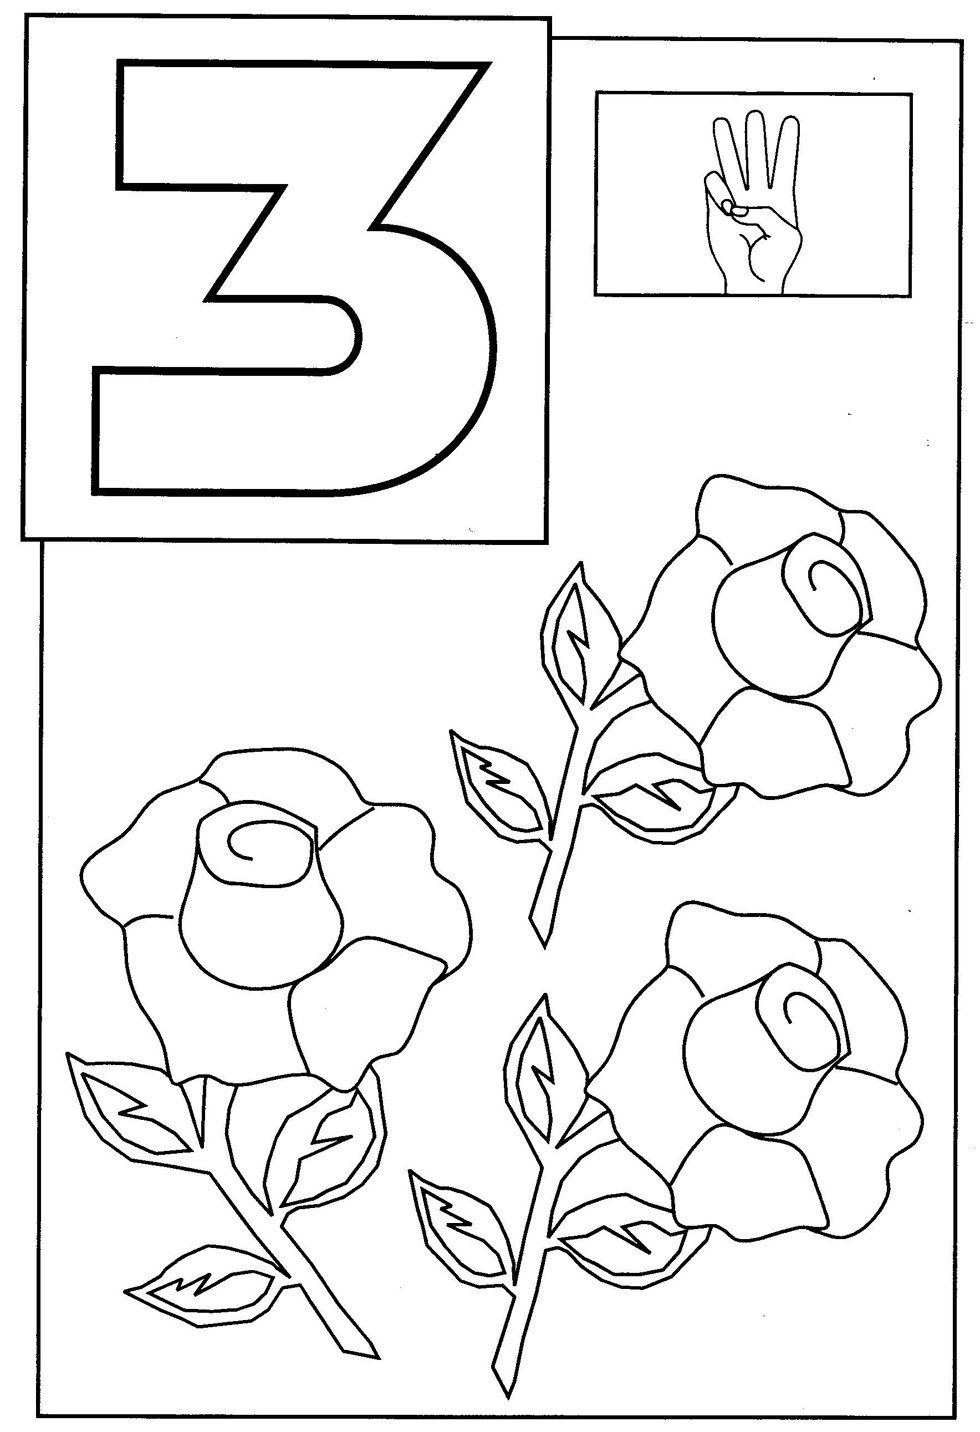 Number Coloring Pages For Toddlers
 Toddler Coloring Pages